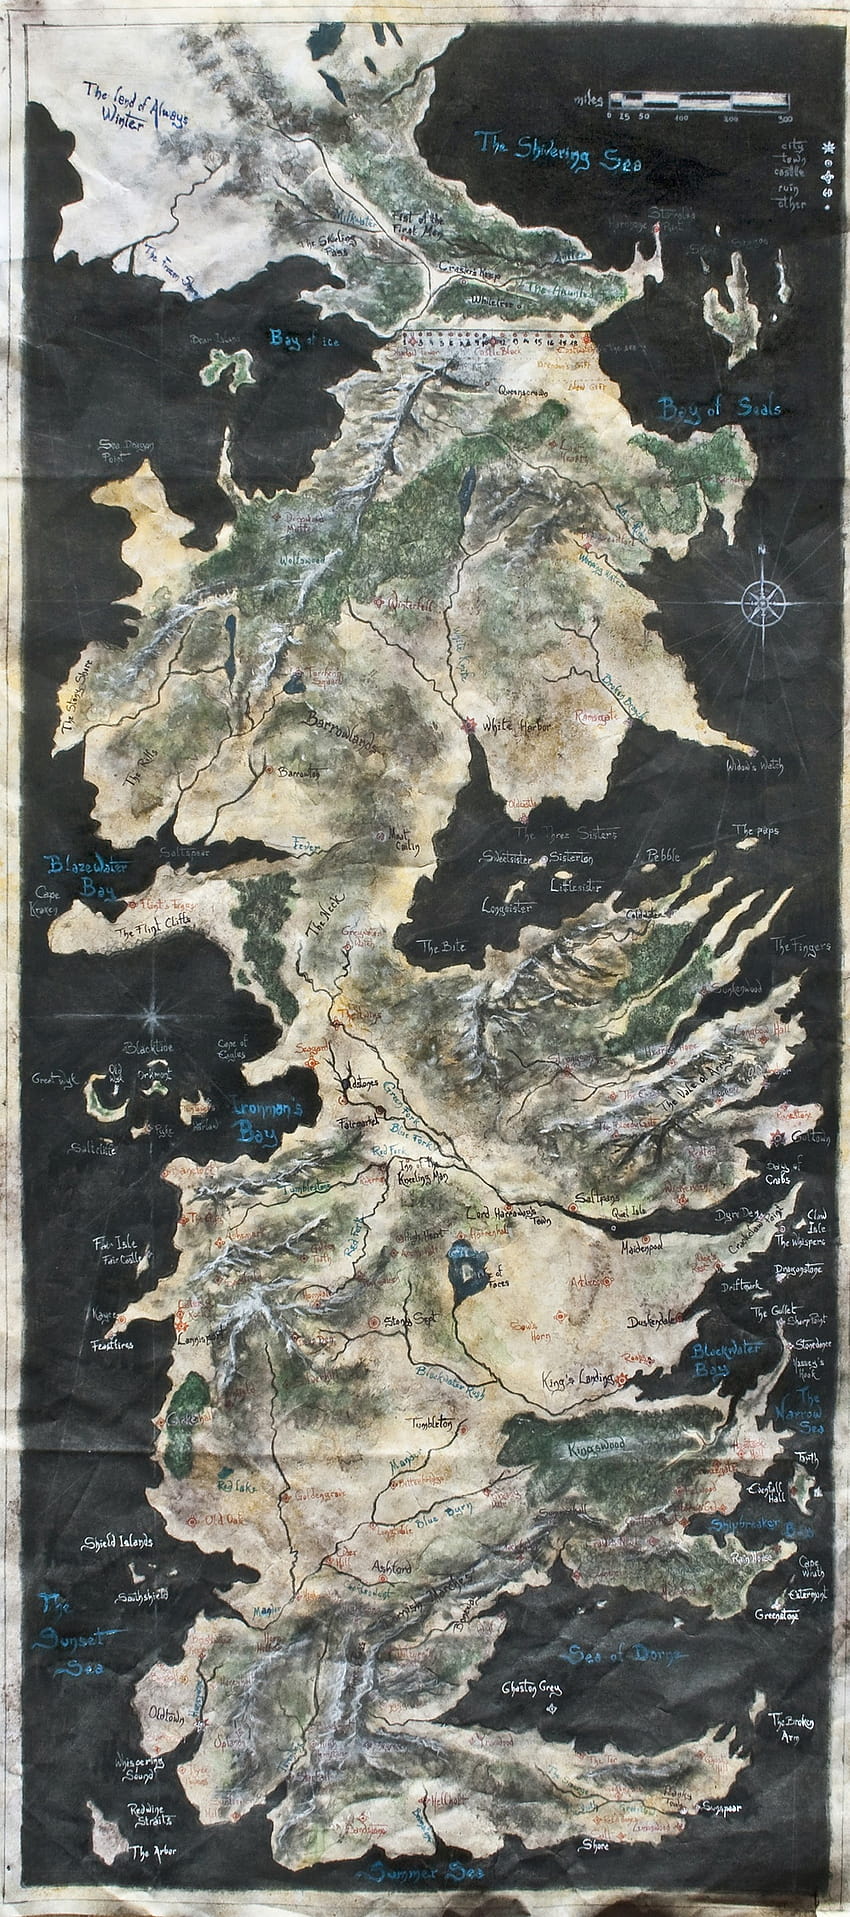 1680x1050 books maps game of thrones a song of ice and fire tv series westeros george r r martin 1330x300 –, westeros map HD phone wallpaper